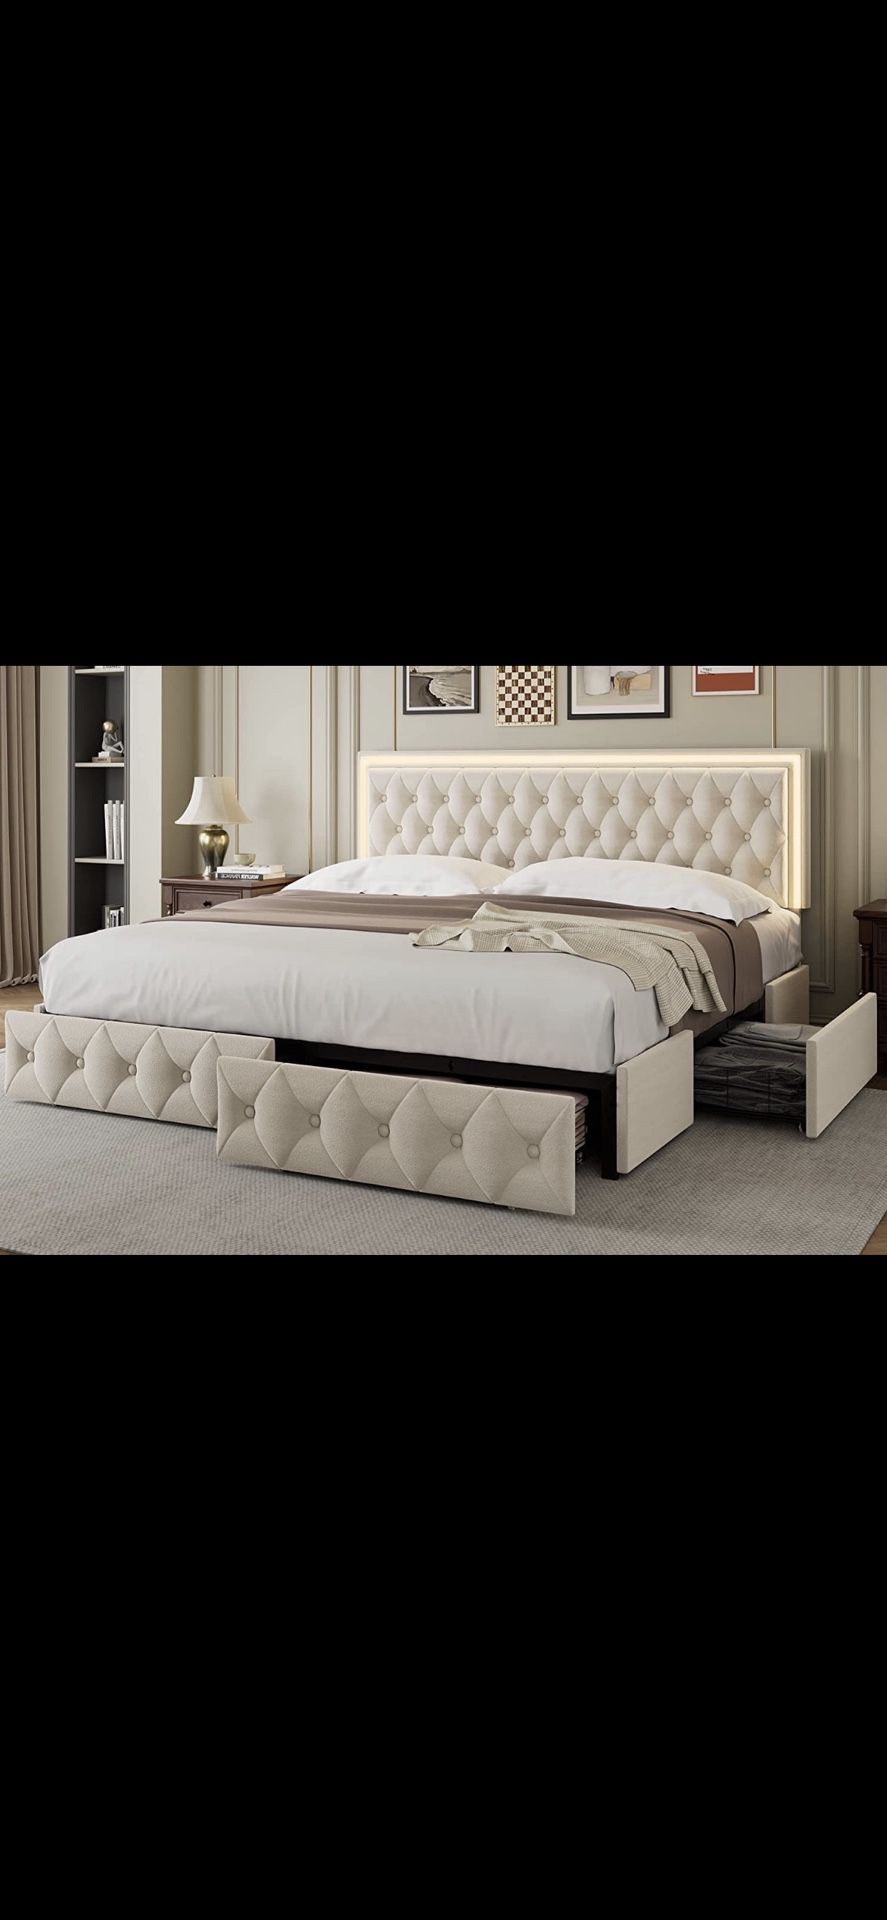 King Bedframe With drawers At The Bottom 